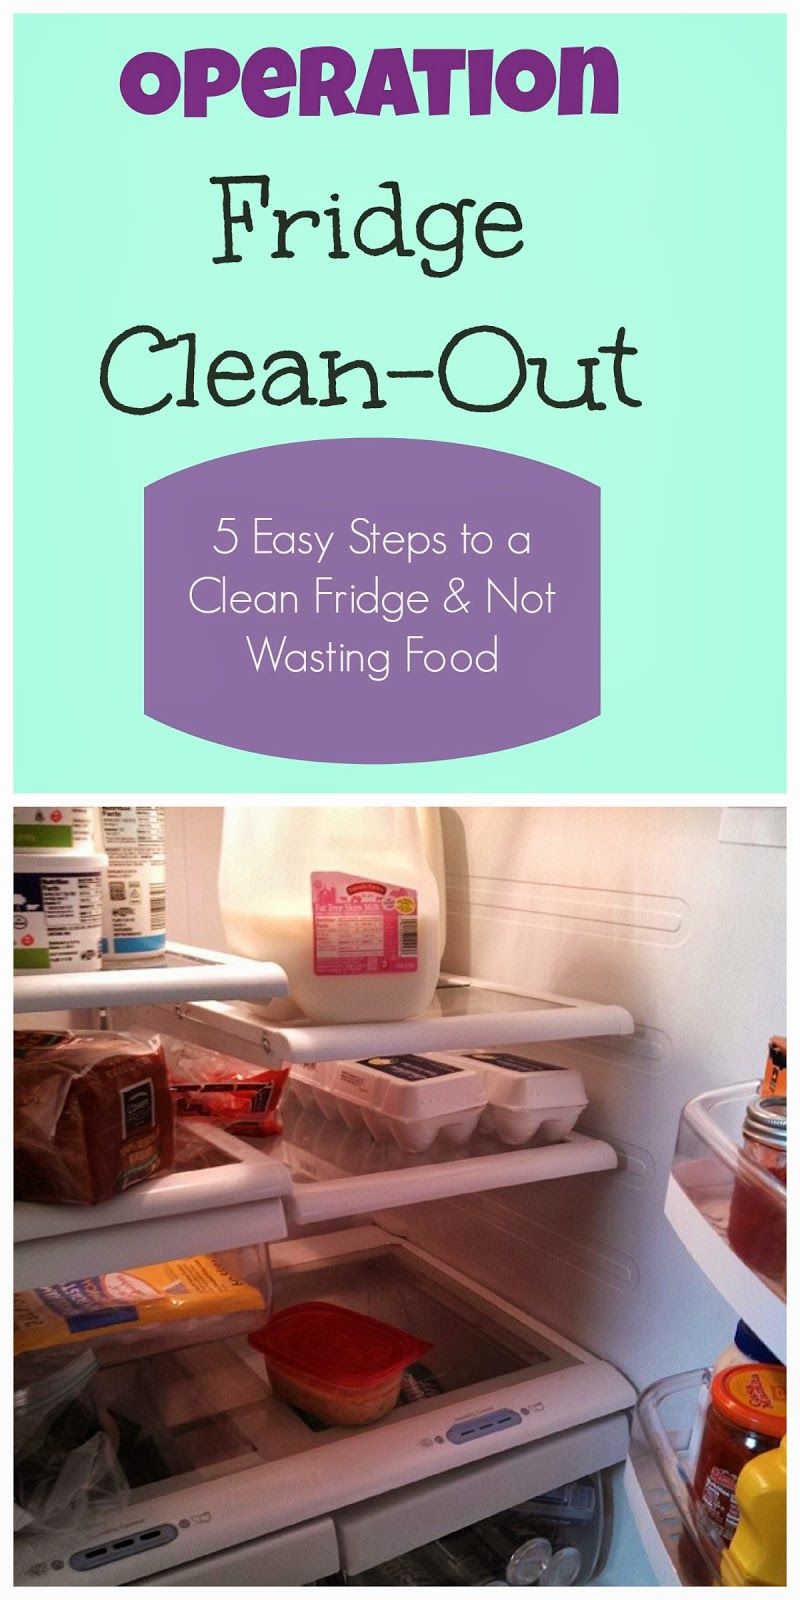 Ally's Sweet and Savory Eats: Operation Fridge Clean-Out: 5 Easy Steps ...